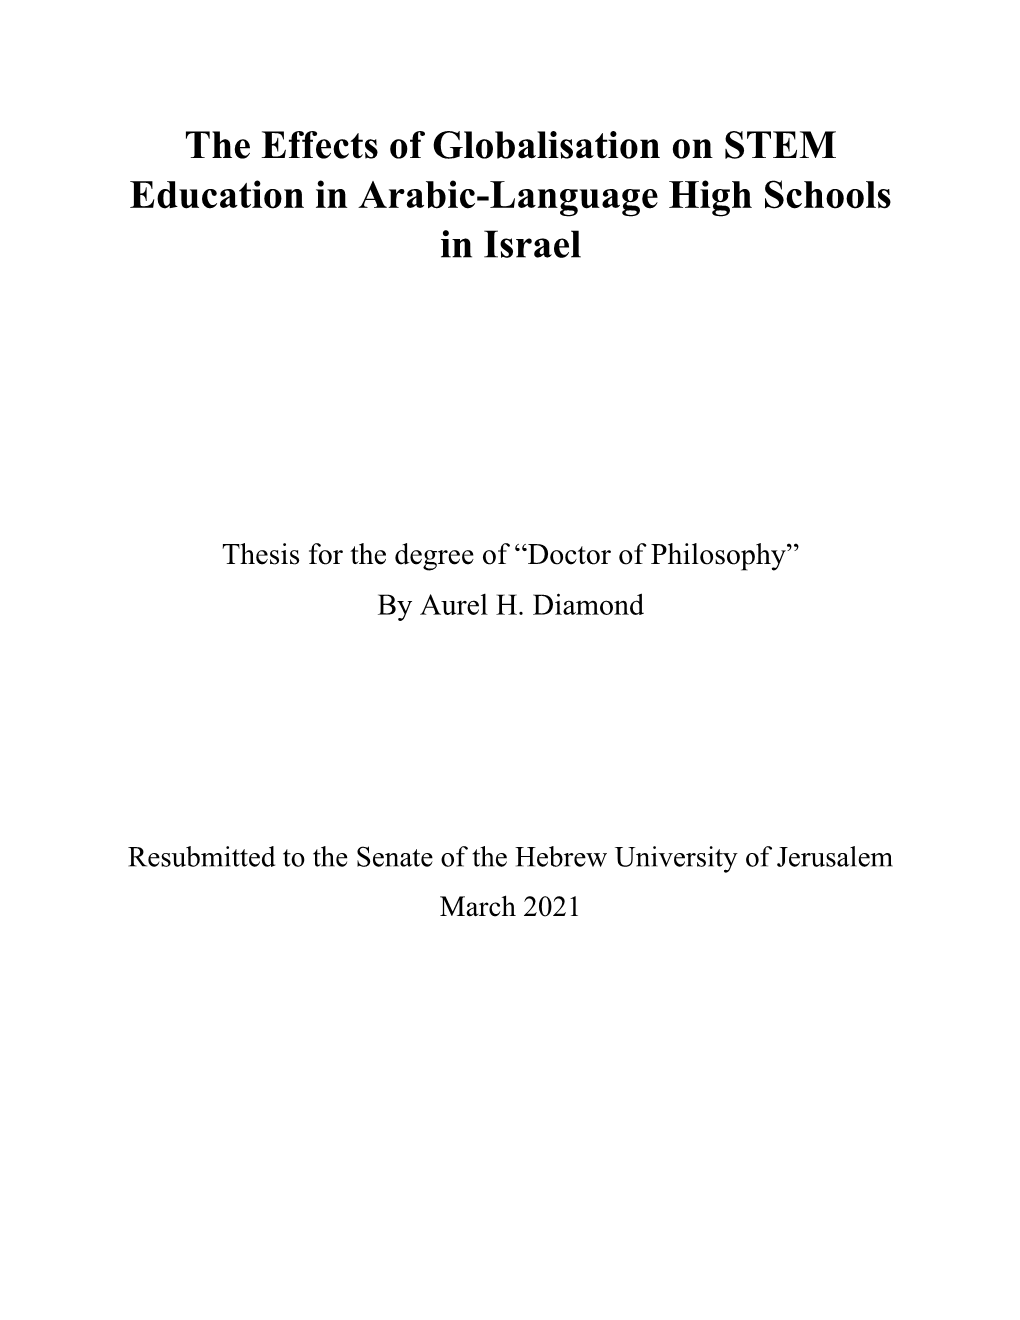 The Effects of Globalisation on STEM Education in Arabic-Language High Schools in Israel